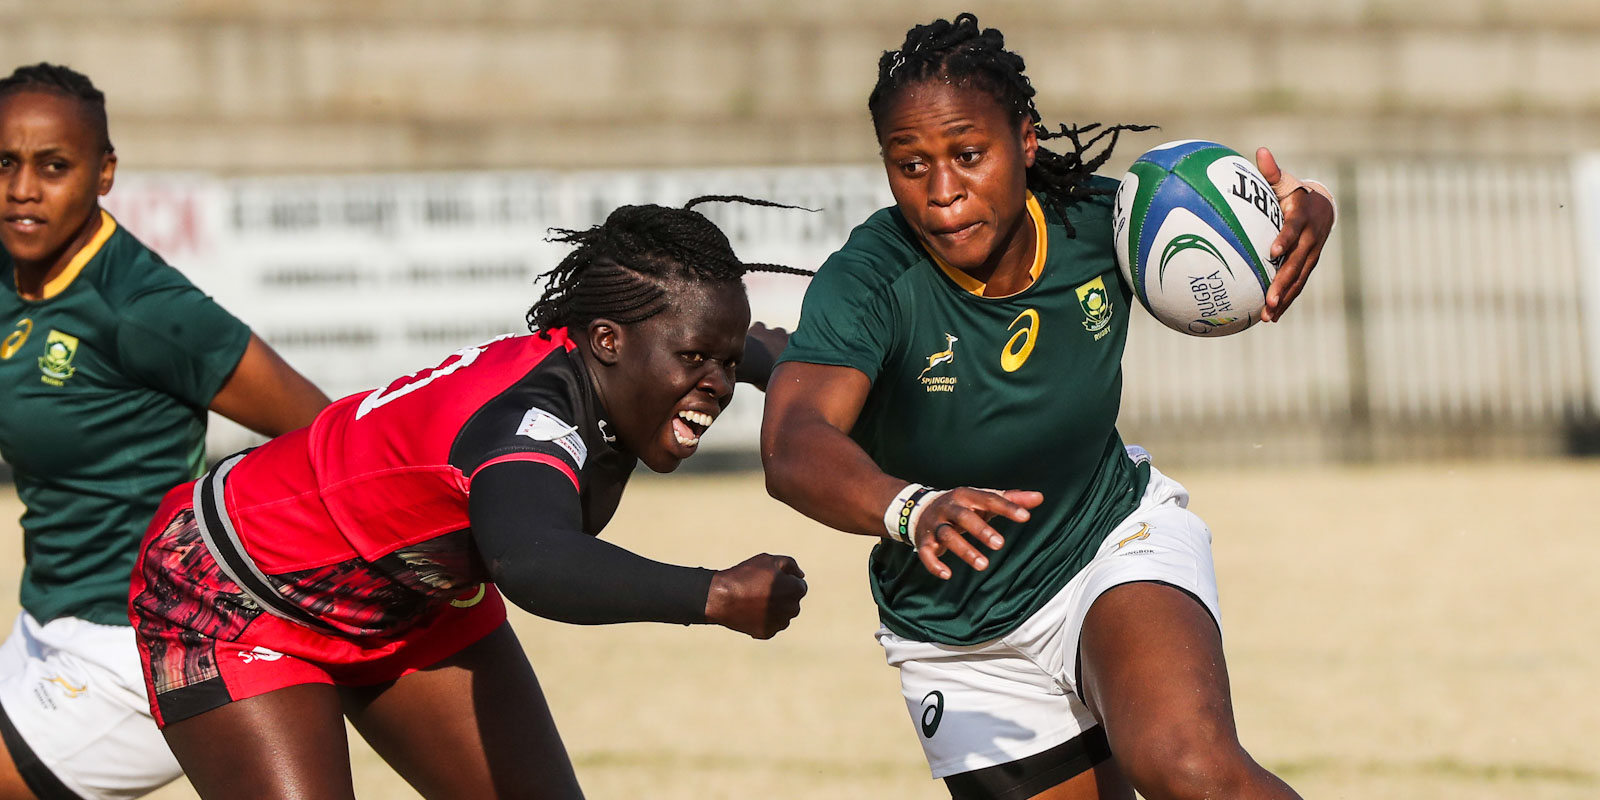 Mpupha in action in the RWC Qualifiers in 2019.